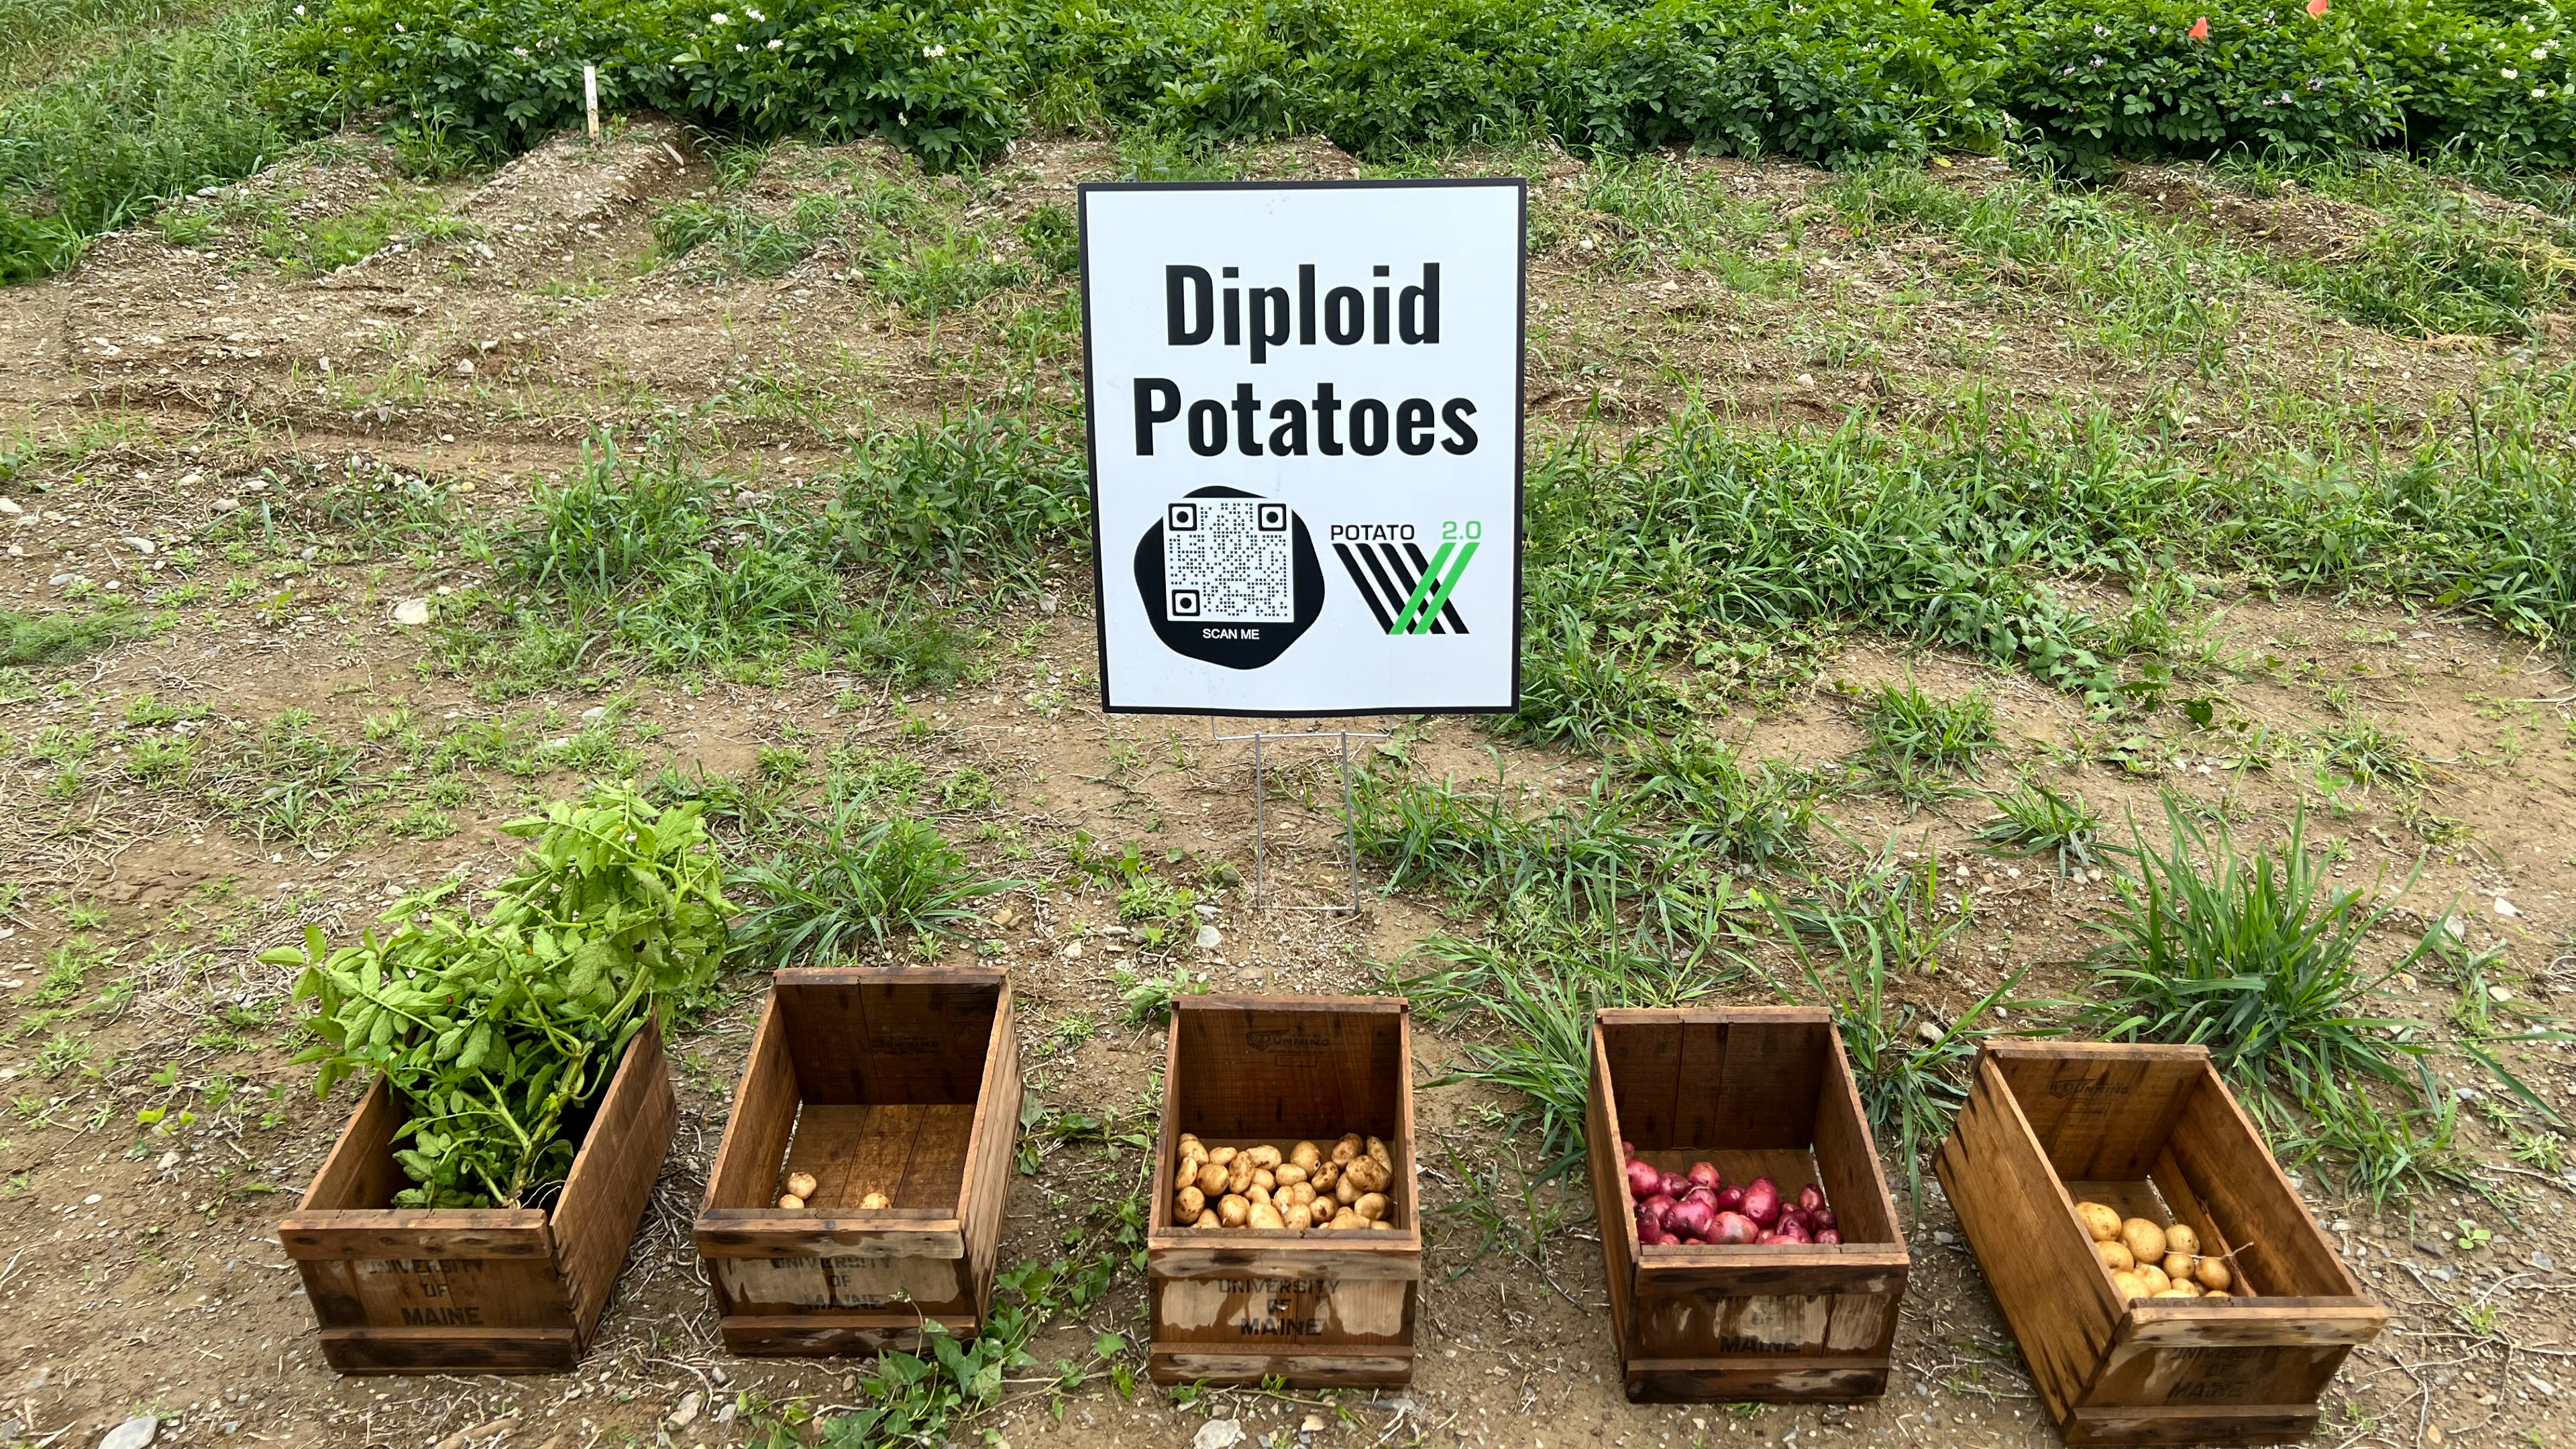 Diploids at University of Maine Field Day